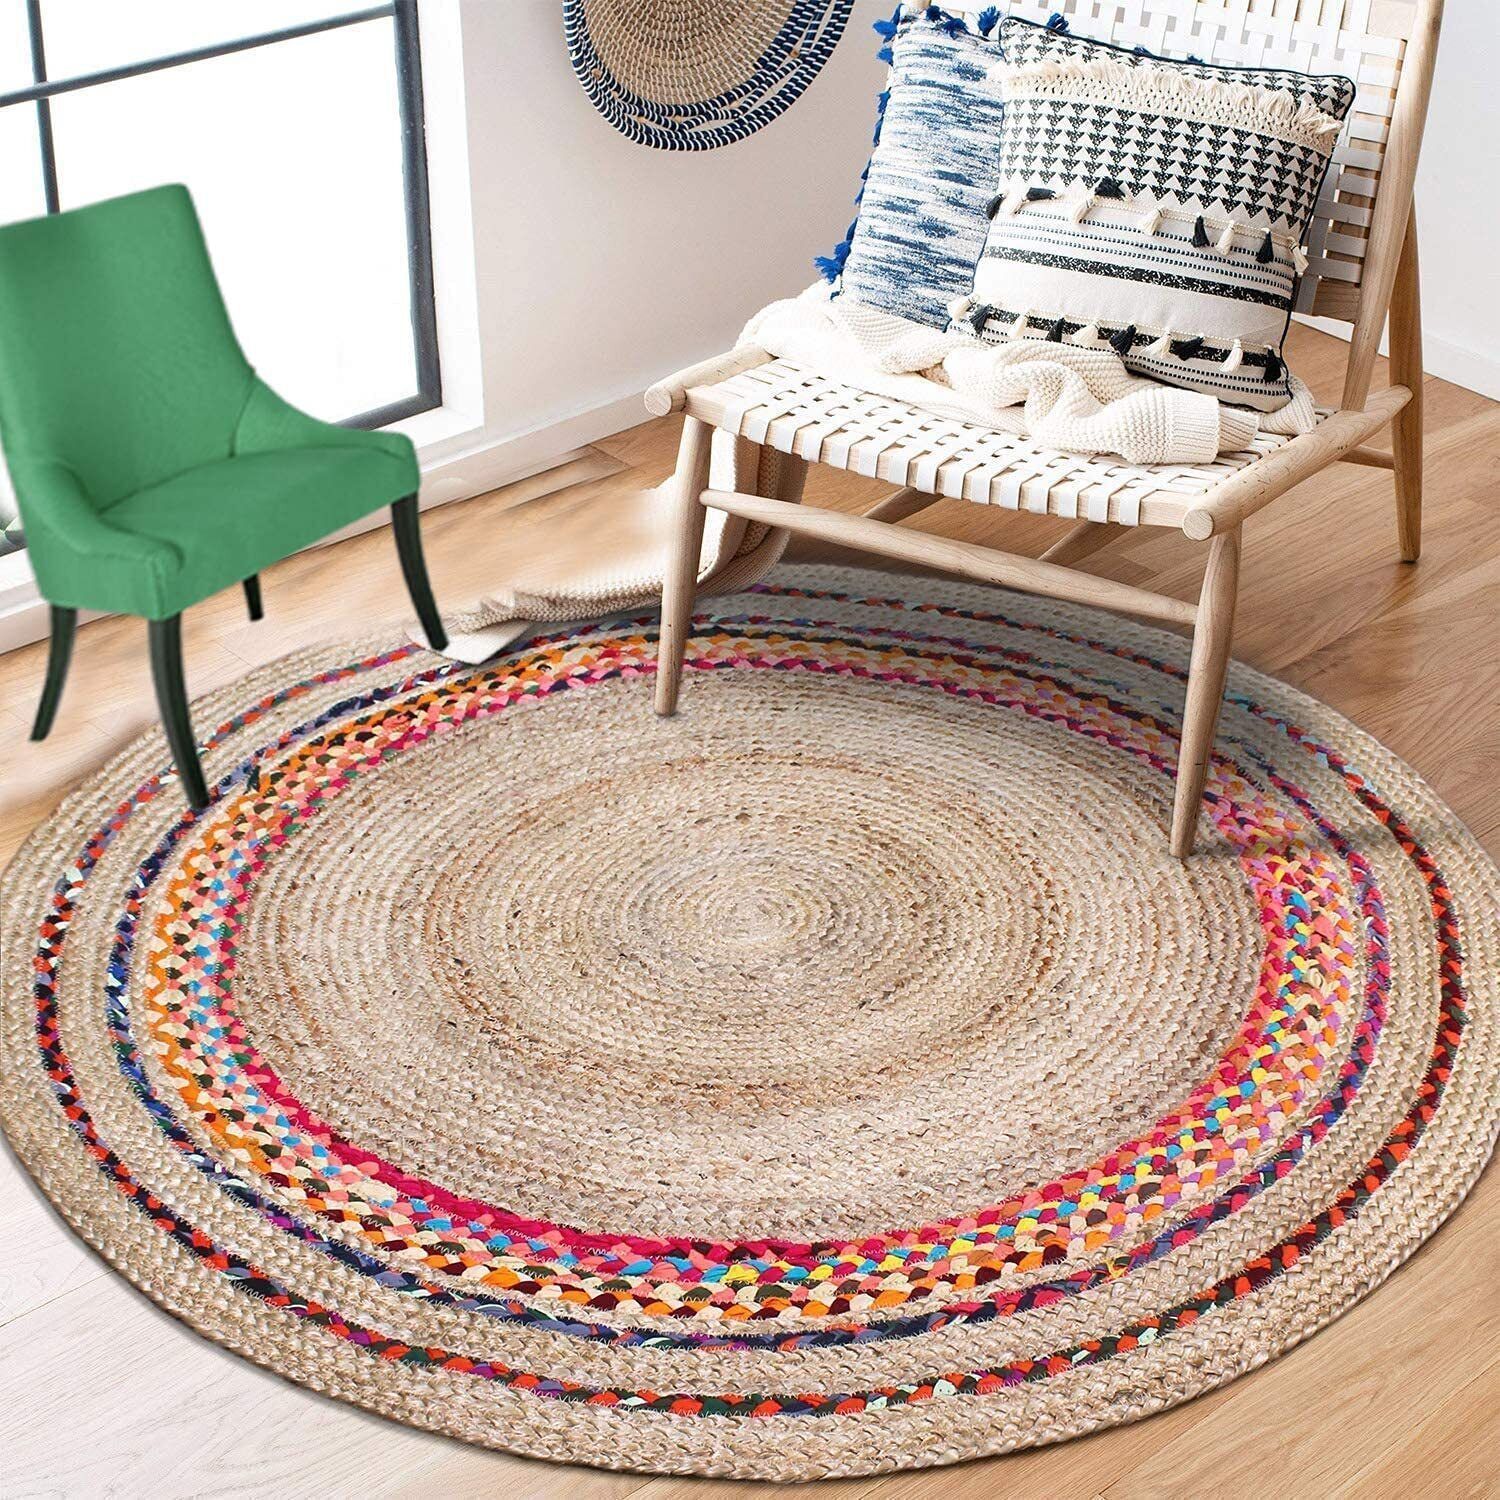 Home Furnishing Handwoven Jute Rug, Natural Braided Reversible Carpet (23  Inch) | Ebay Inside Hand Woven Braided Rugs (View 8 of 15)